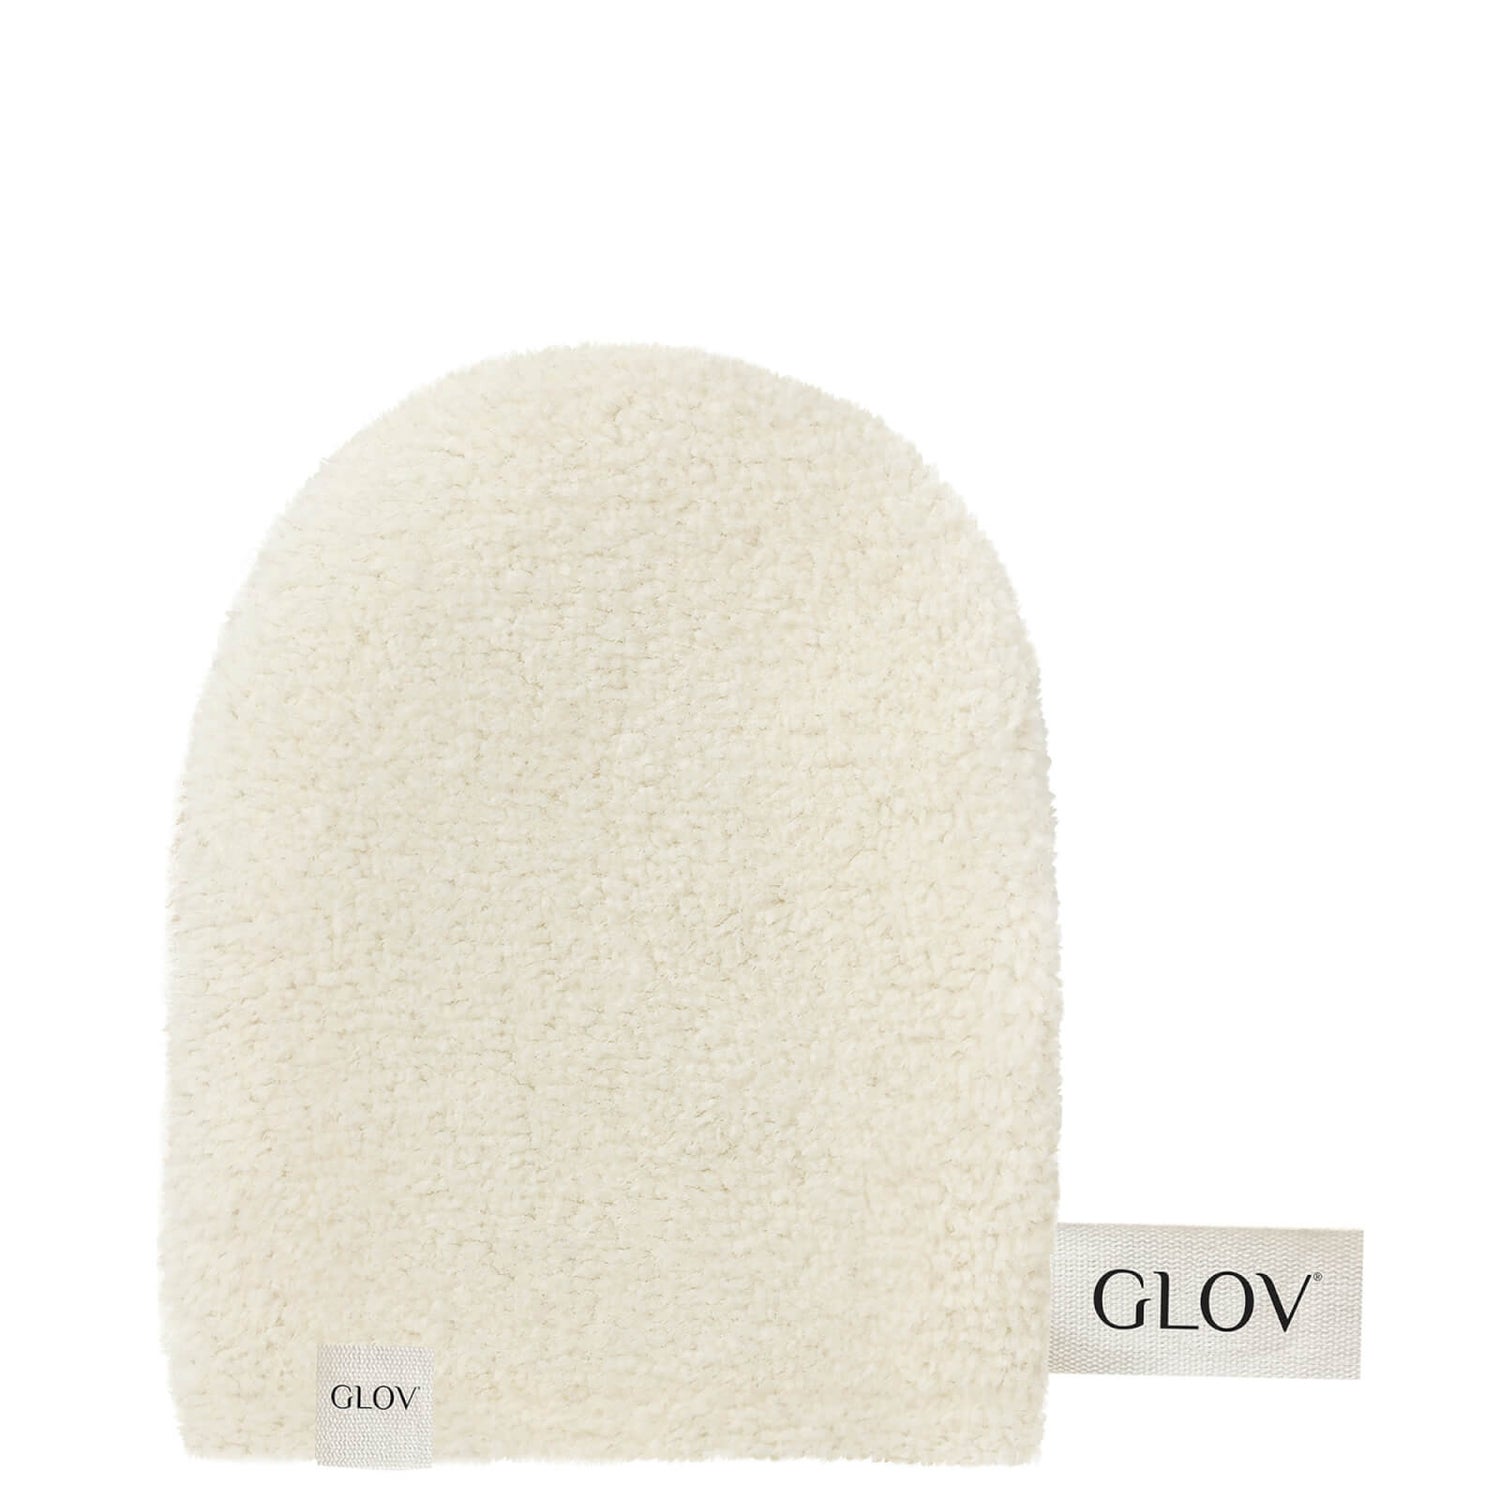 GLOV® Water-Only Makeup Removing and Skin Cleansing Mitt - Ivory